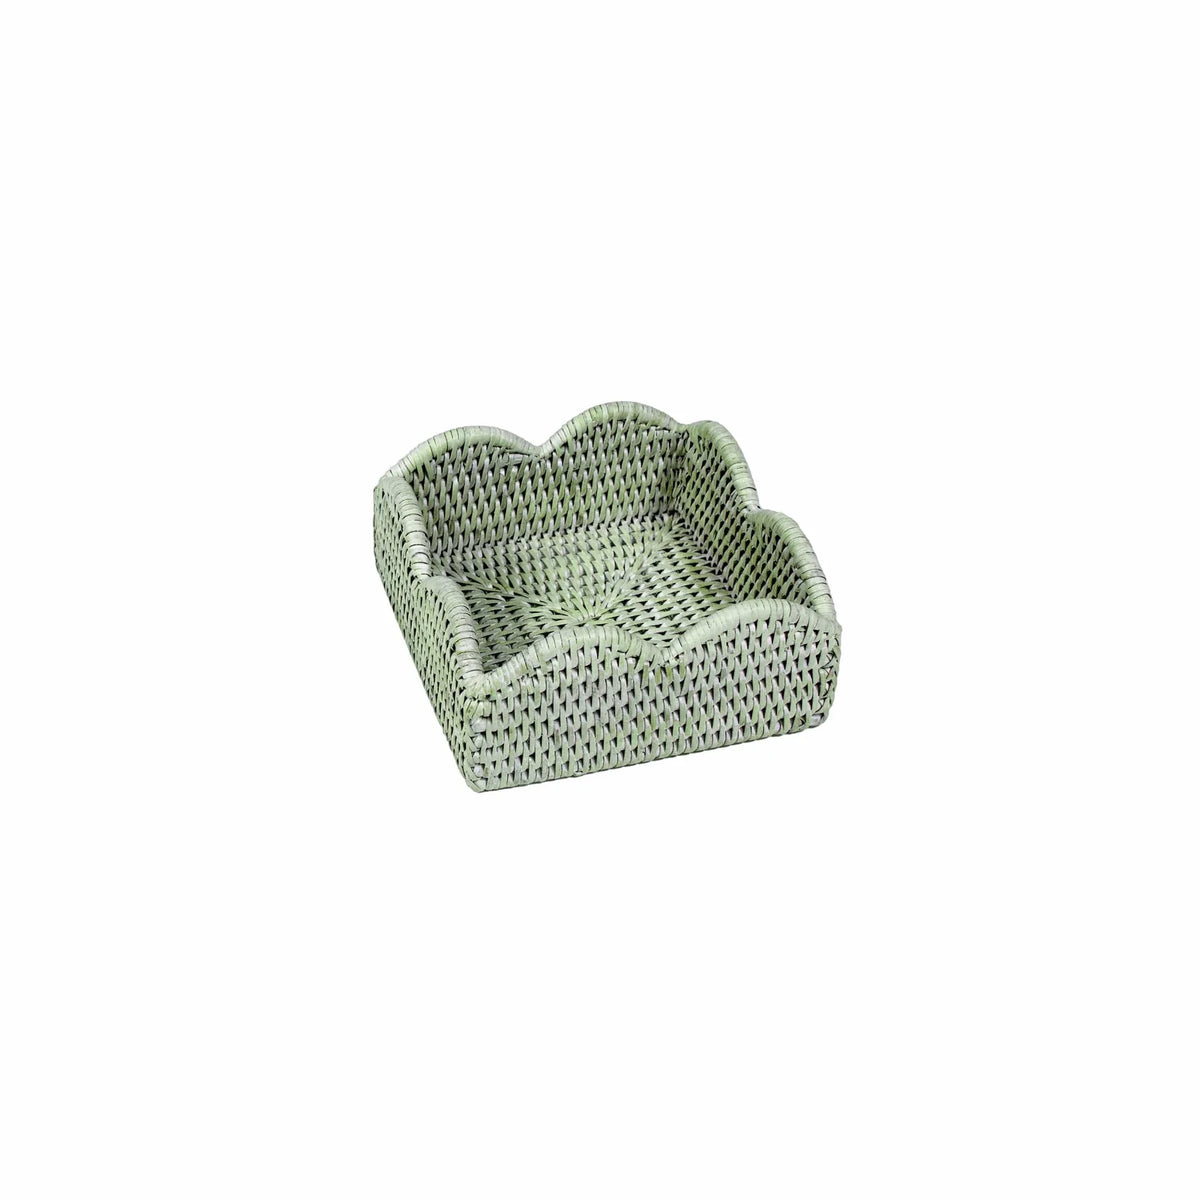 Rattan Scalloped Cocktail Napkin Holders in Green